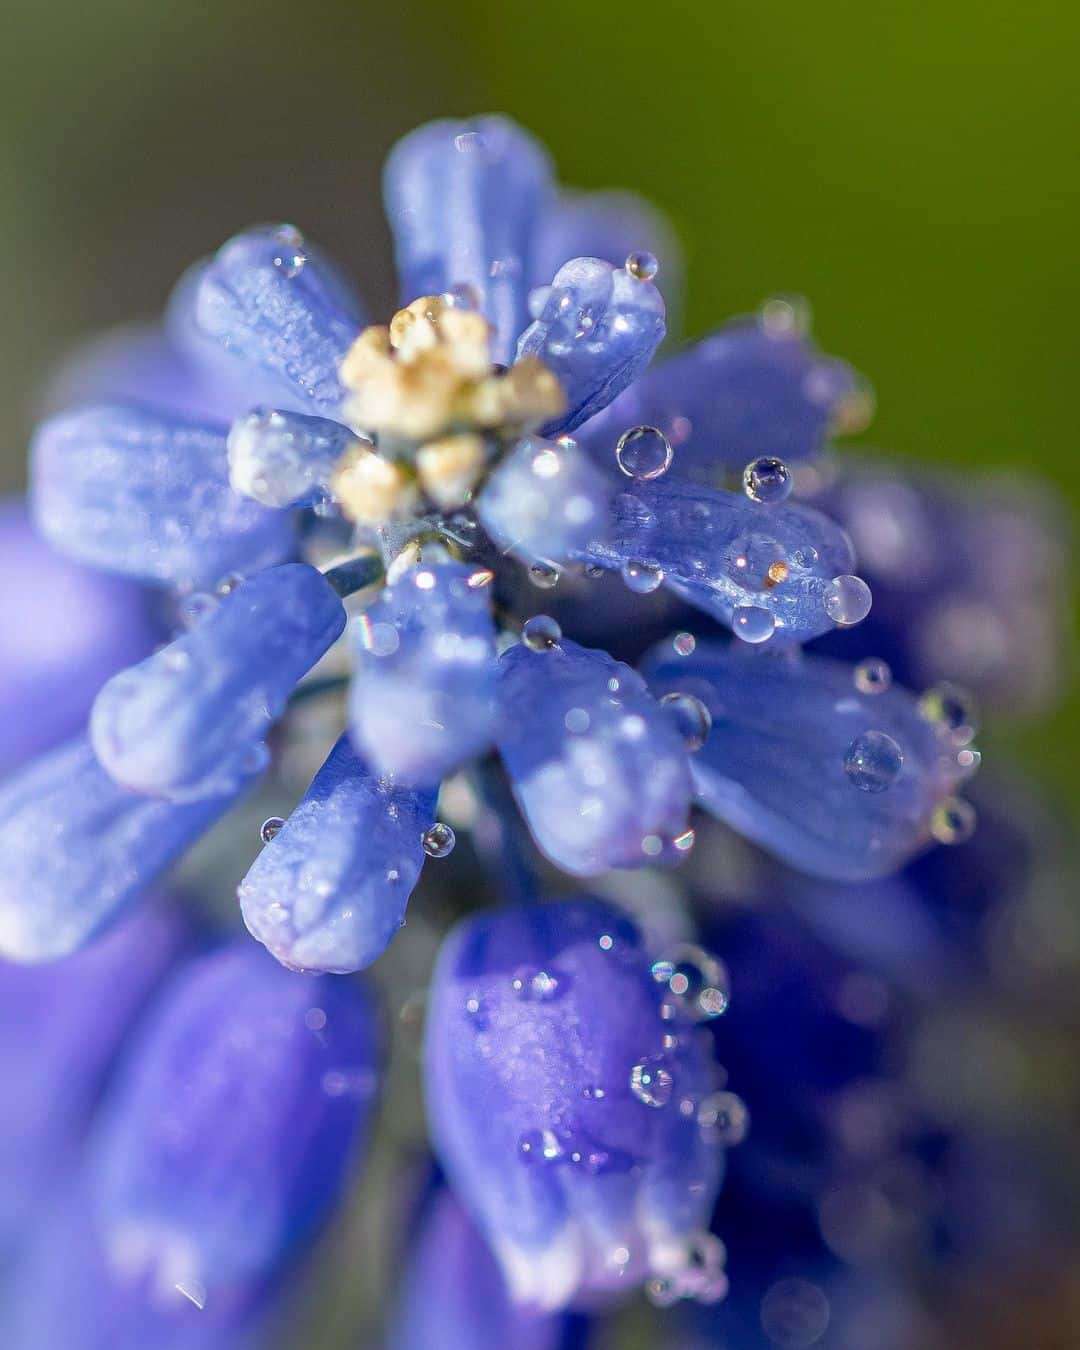 Remarkable Macro and Nature Photography by Helen Tran